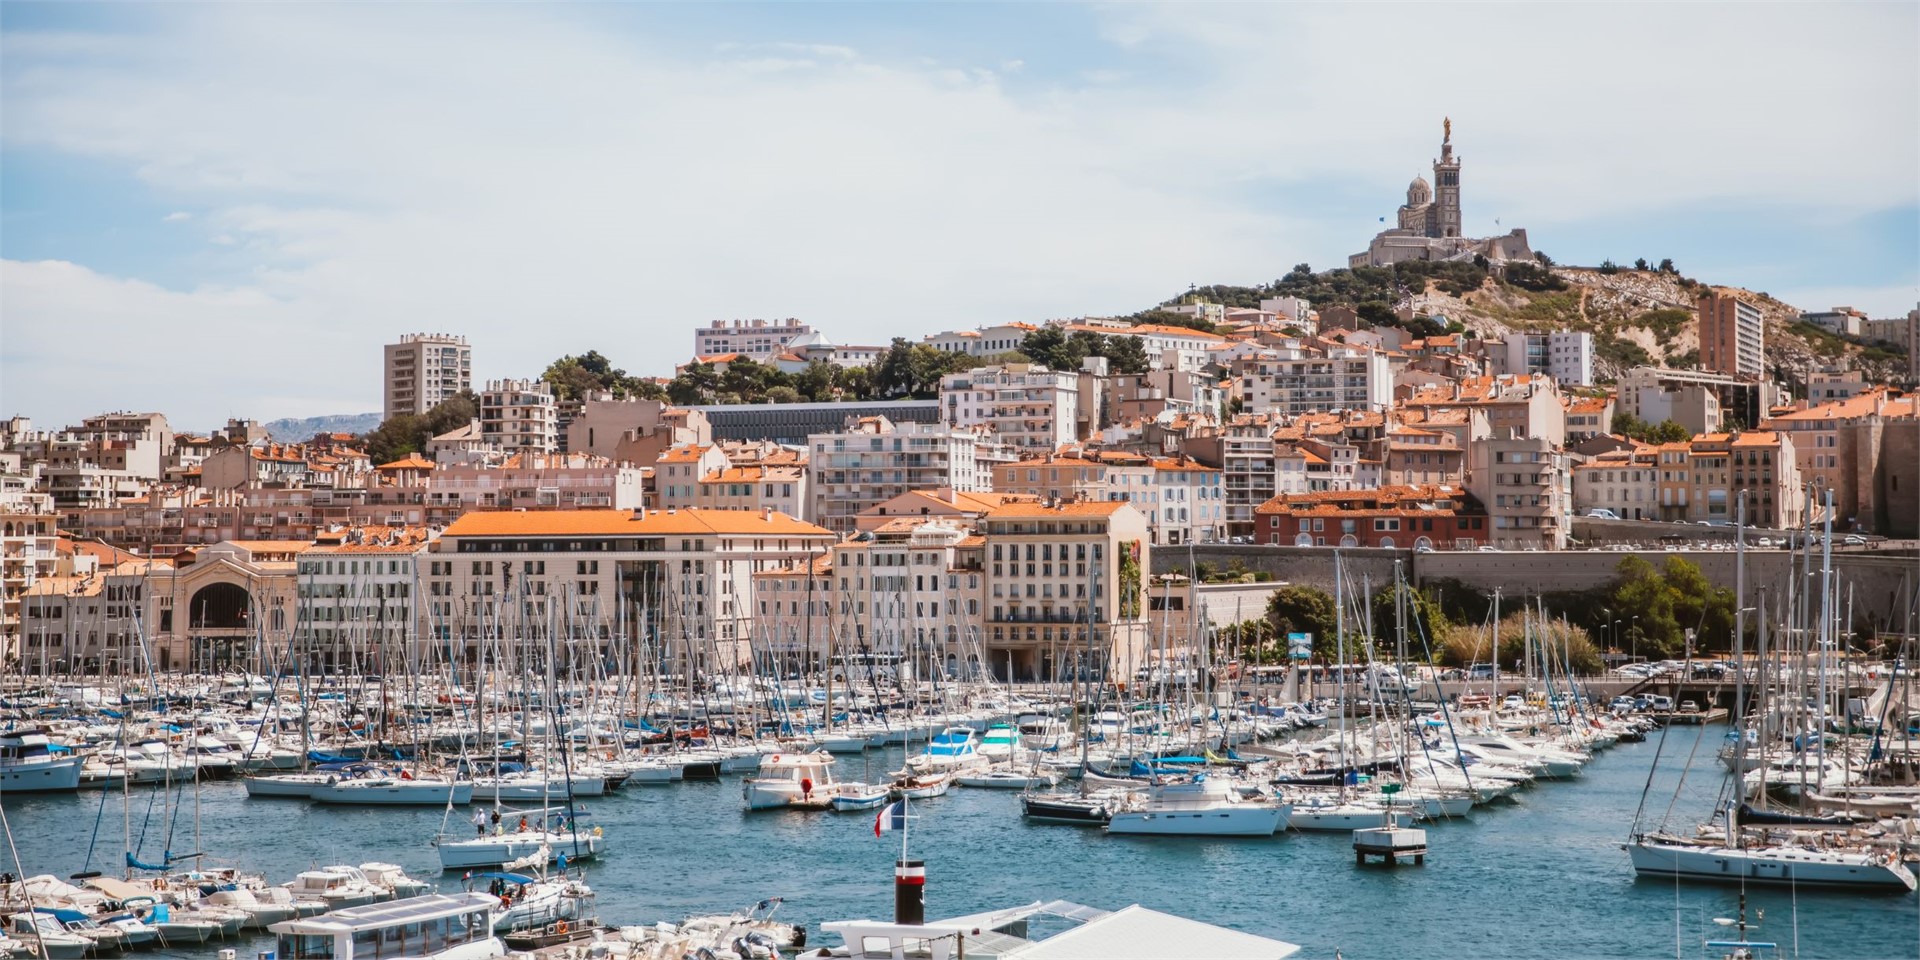 Hotels and accommodation in Marseille, France
